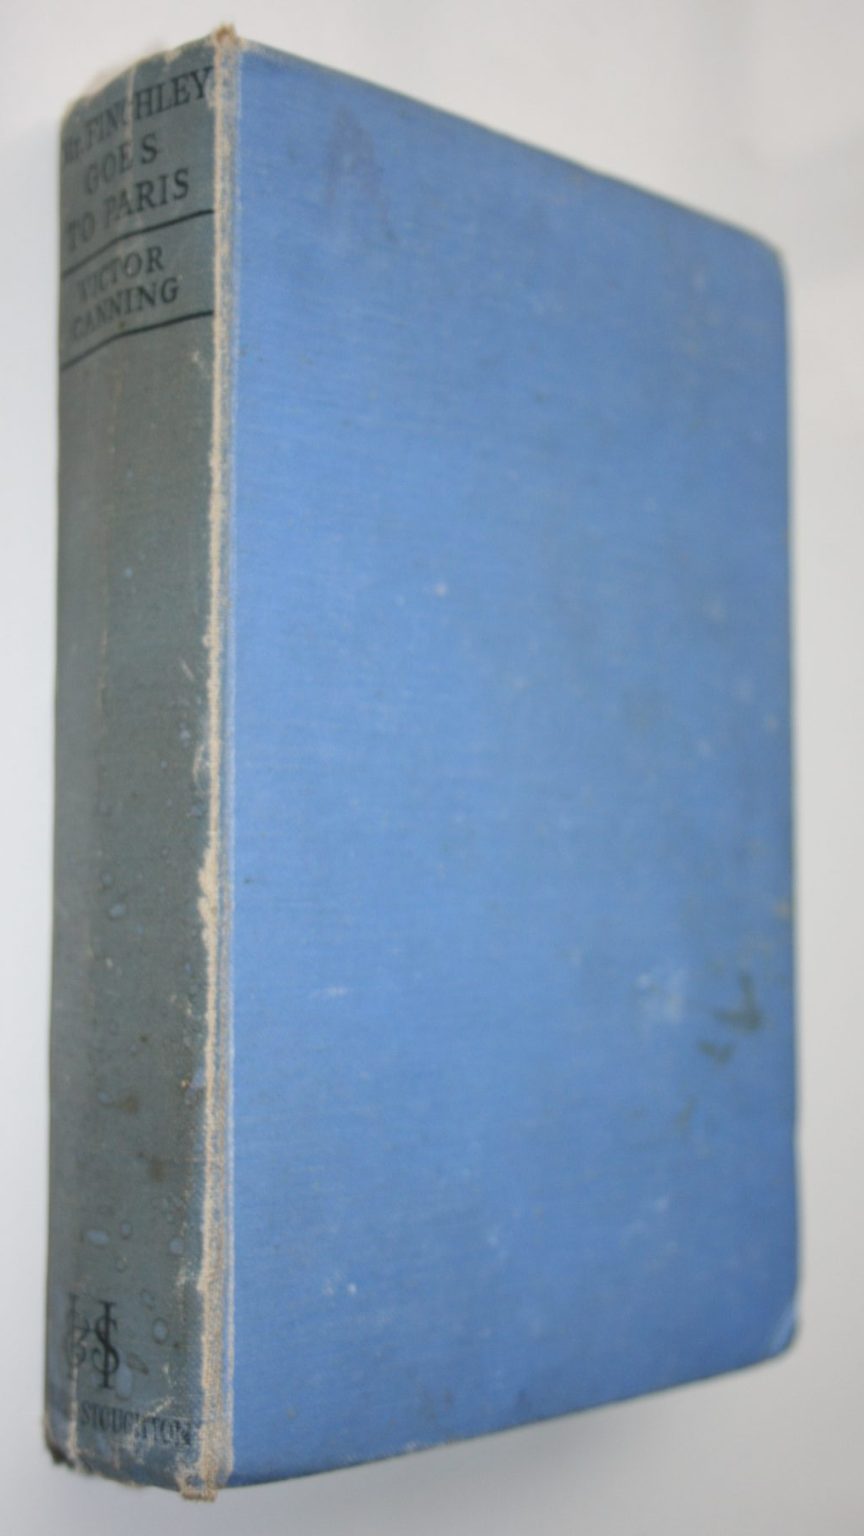 Mr Finchley Goes to Paris. By Victor Canning. 1940, first edition